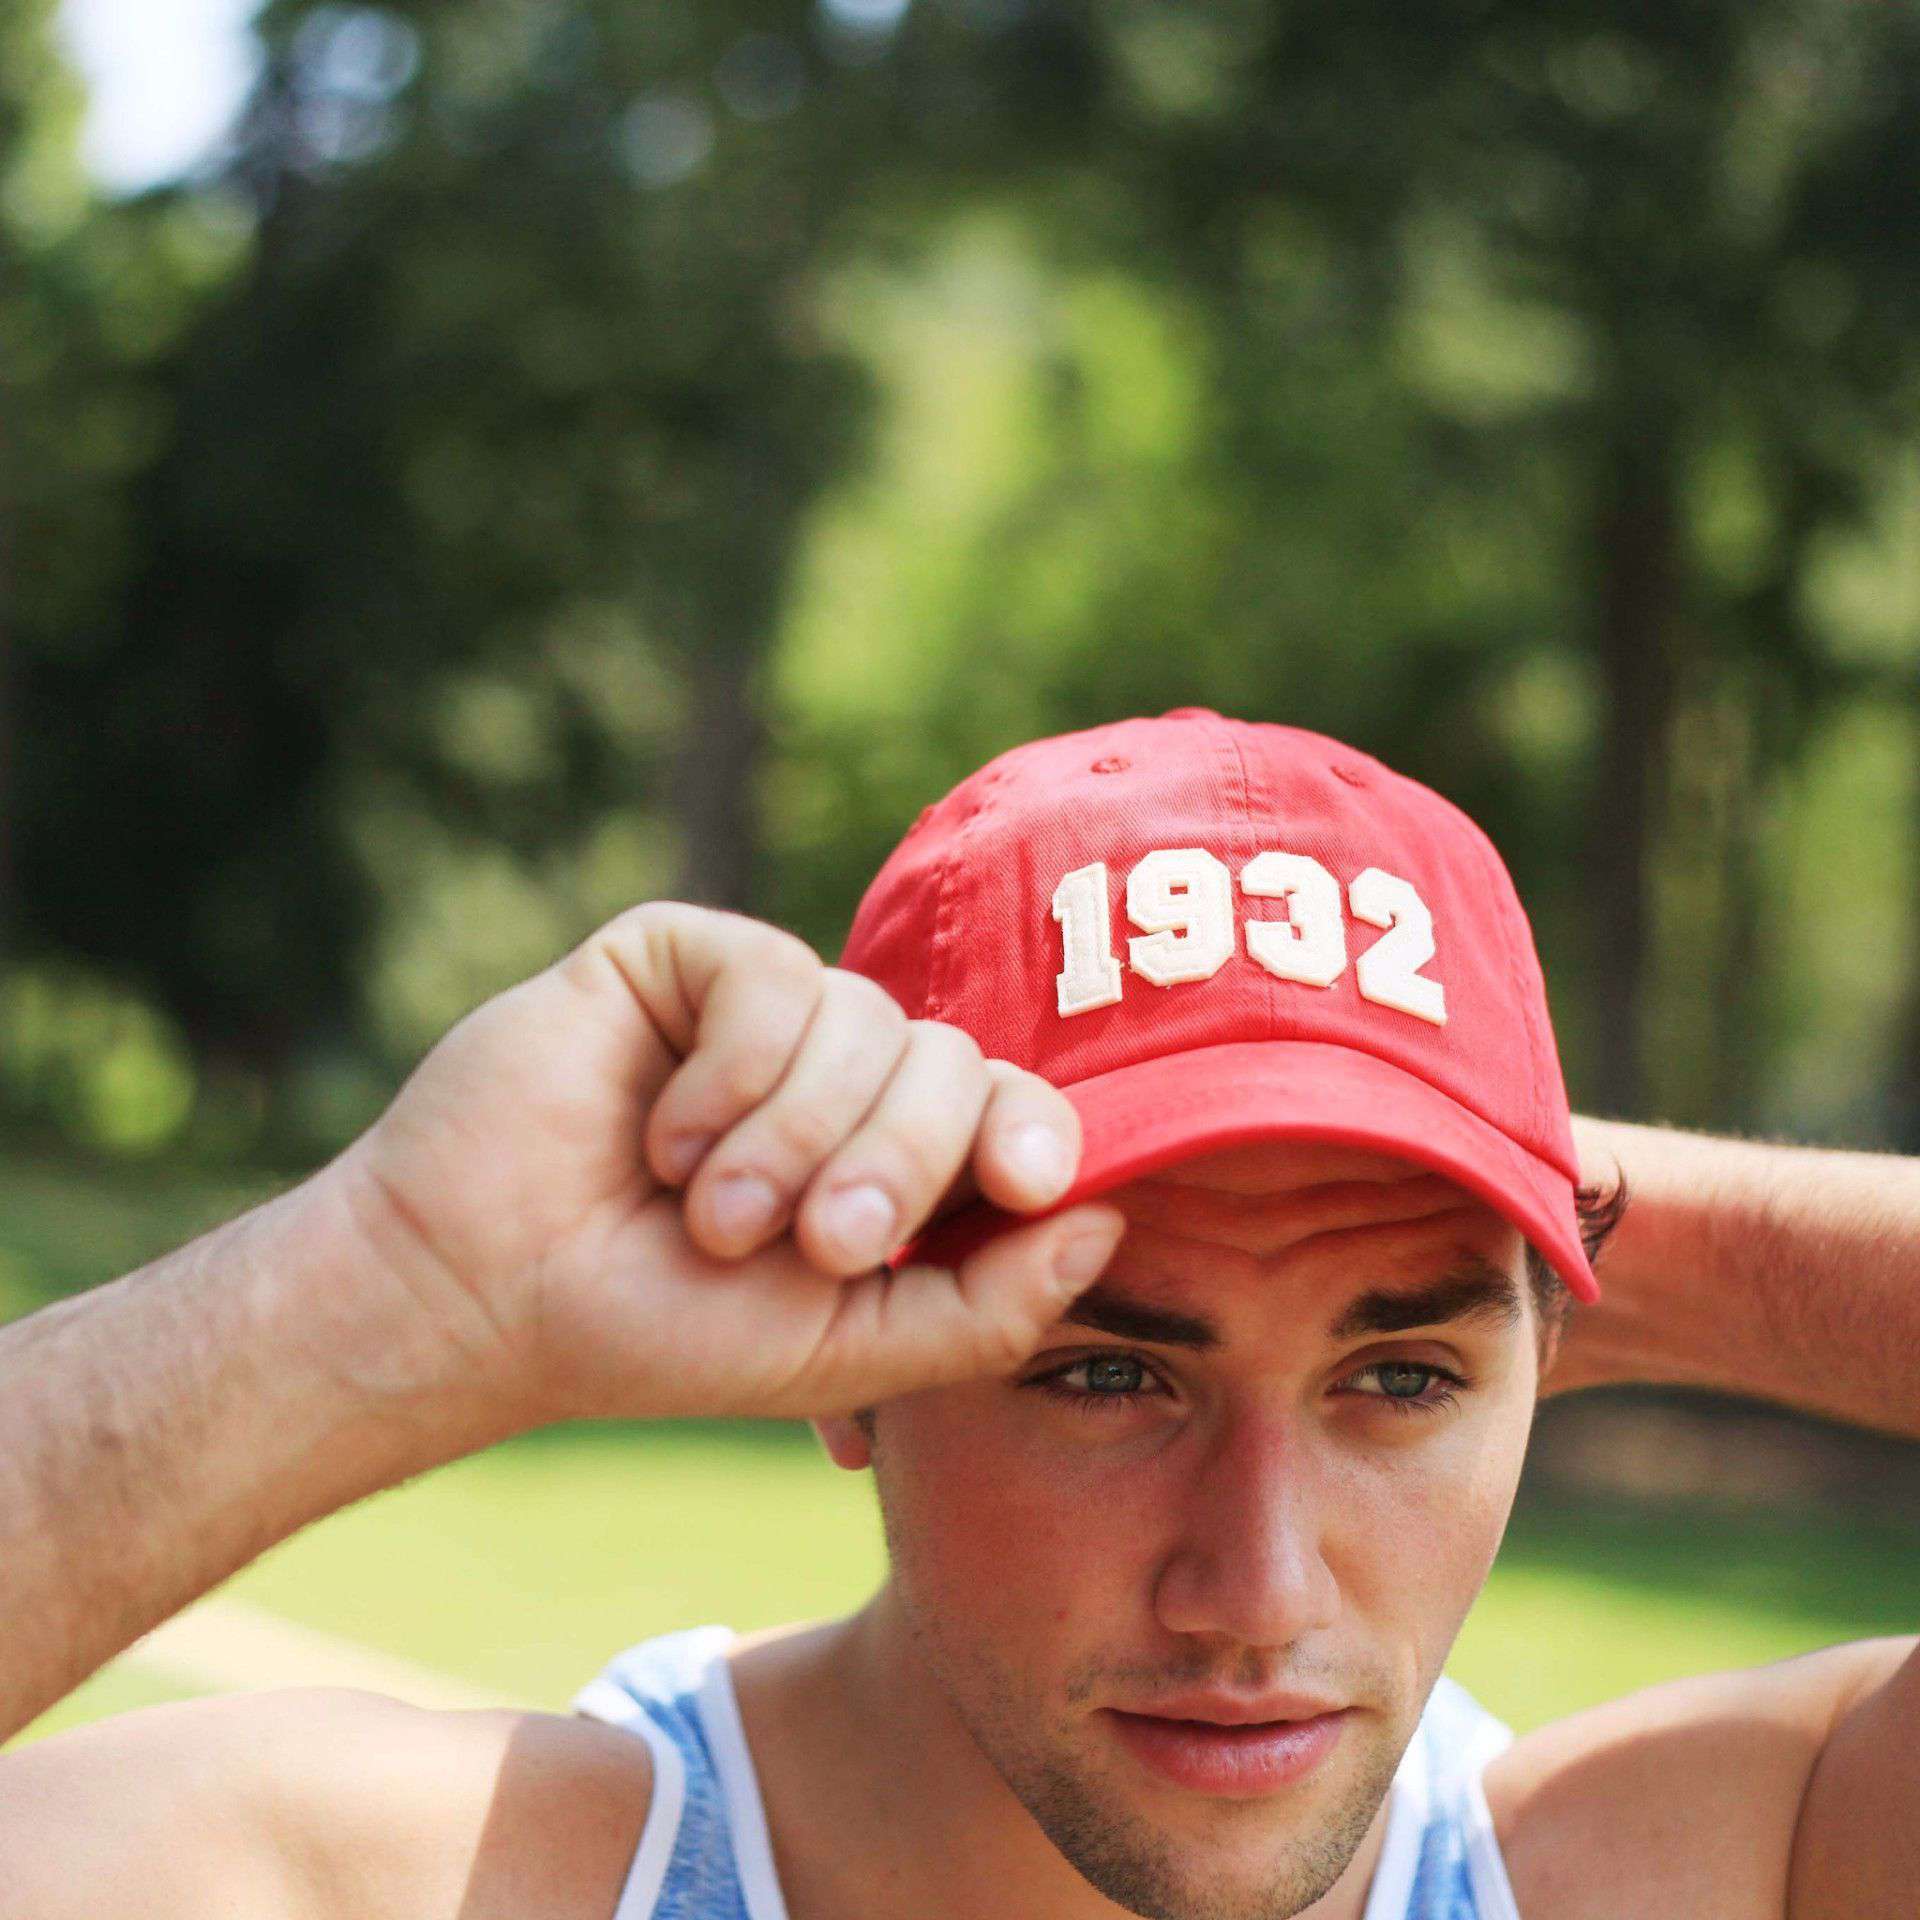 1932 (SEC Founding Year) Hat in Red by Southern Proper - Country Club Prep